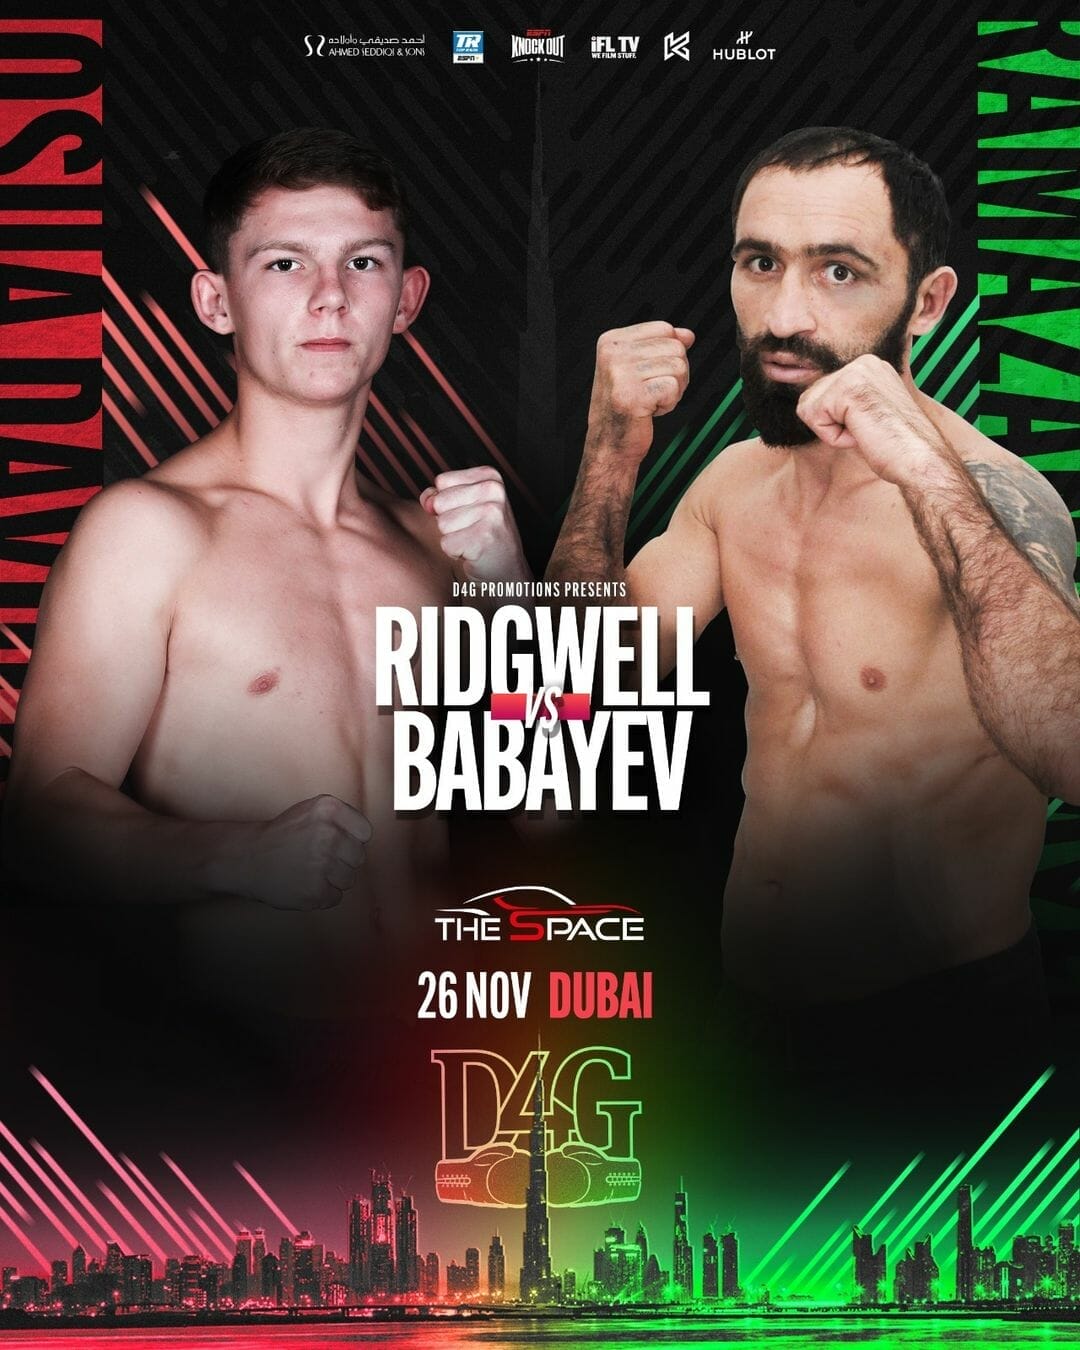 Round 10 boxing match featuring Rickwell vs. Babaev poster.